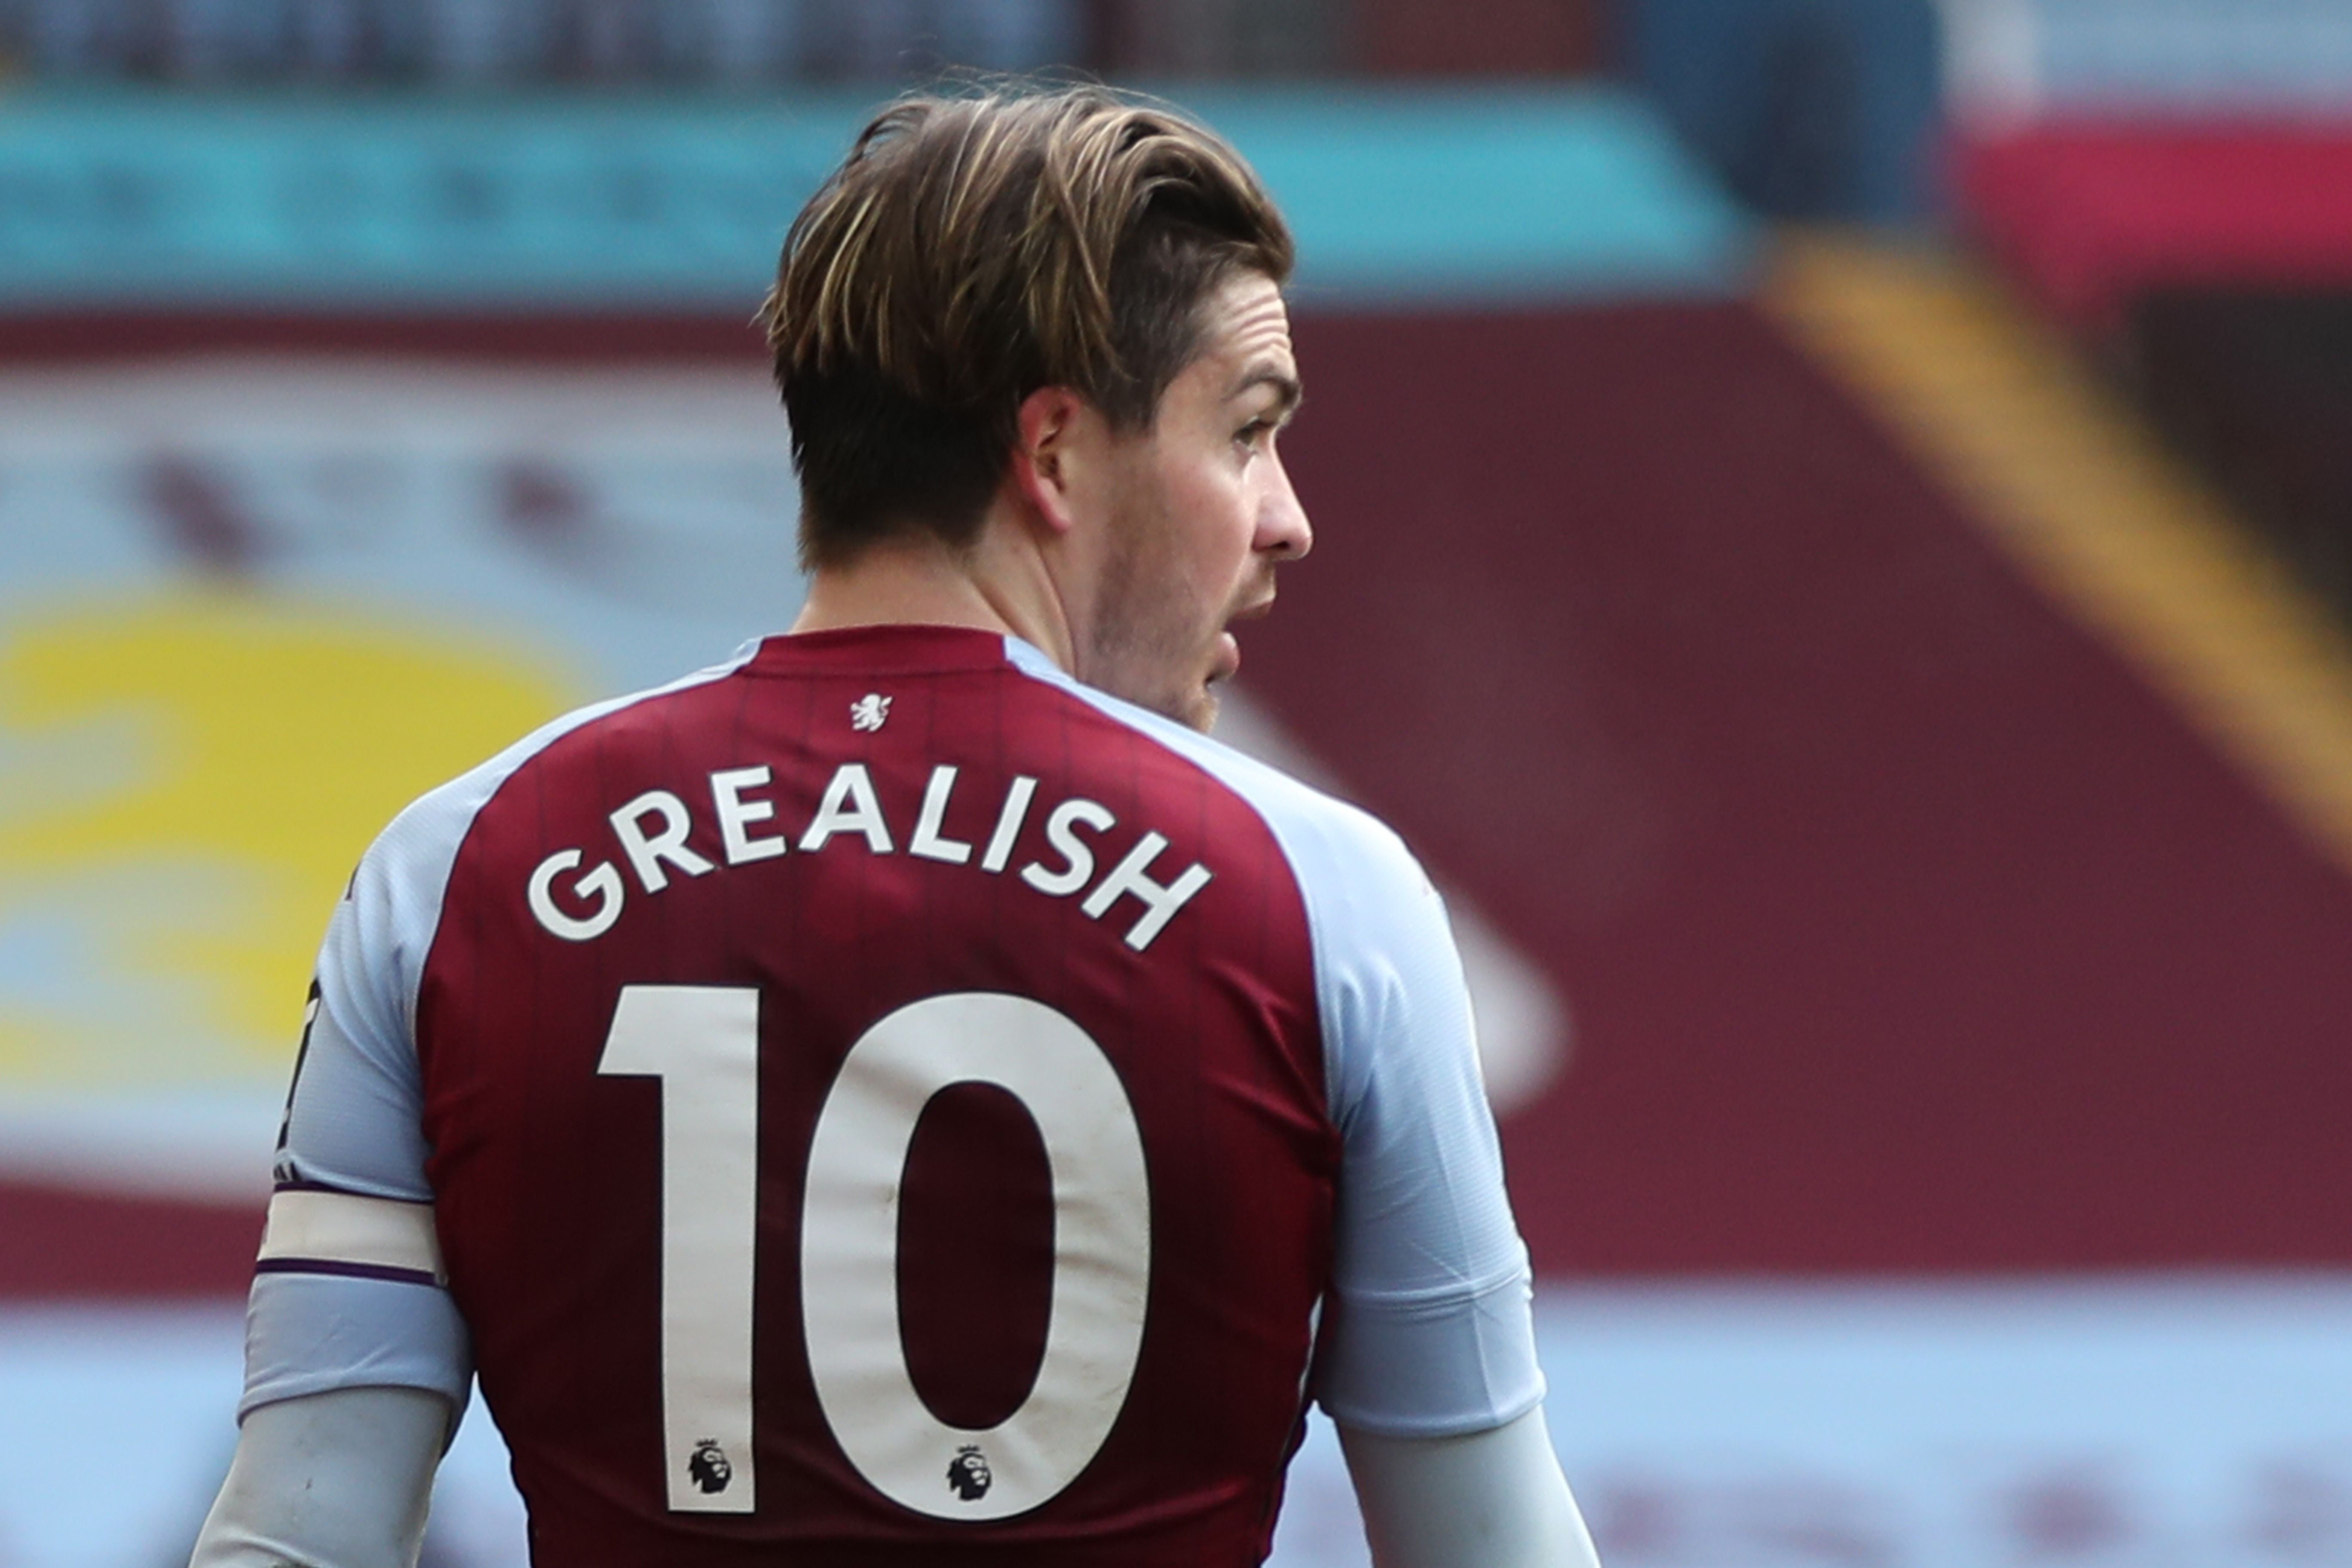 Jack Grealish has six goals and 12 assists in the Premier League this season